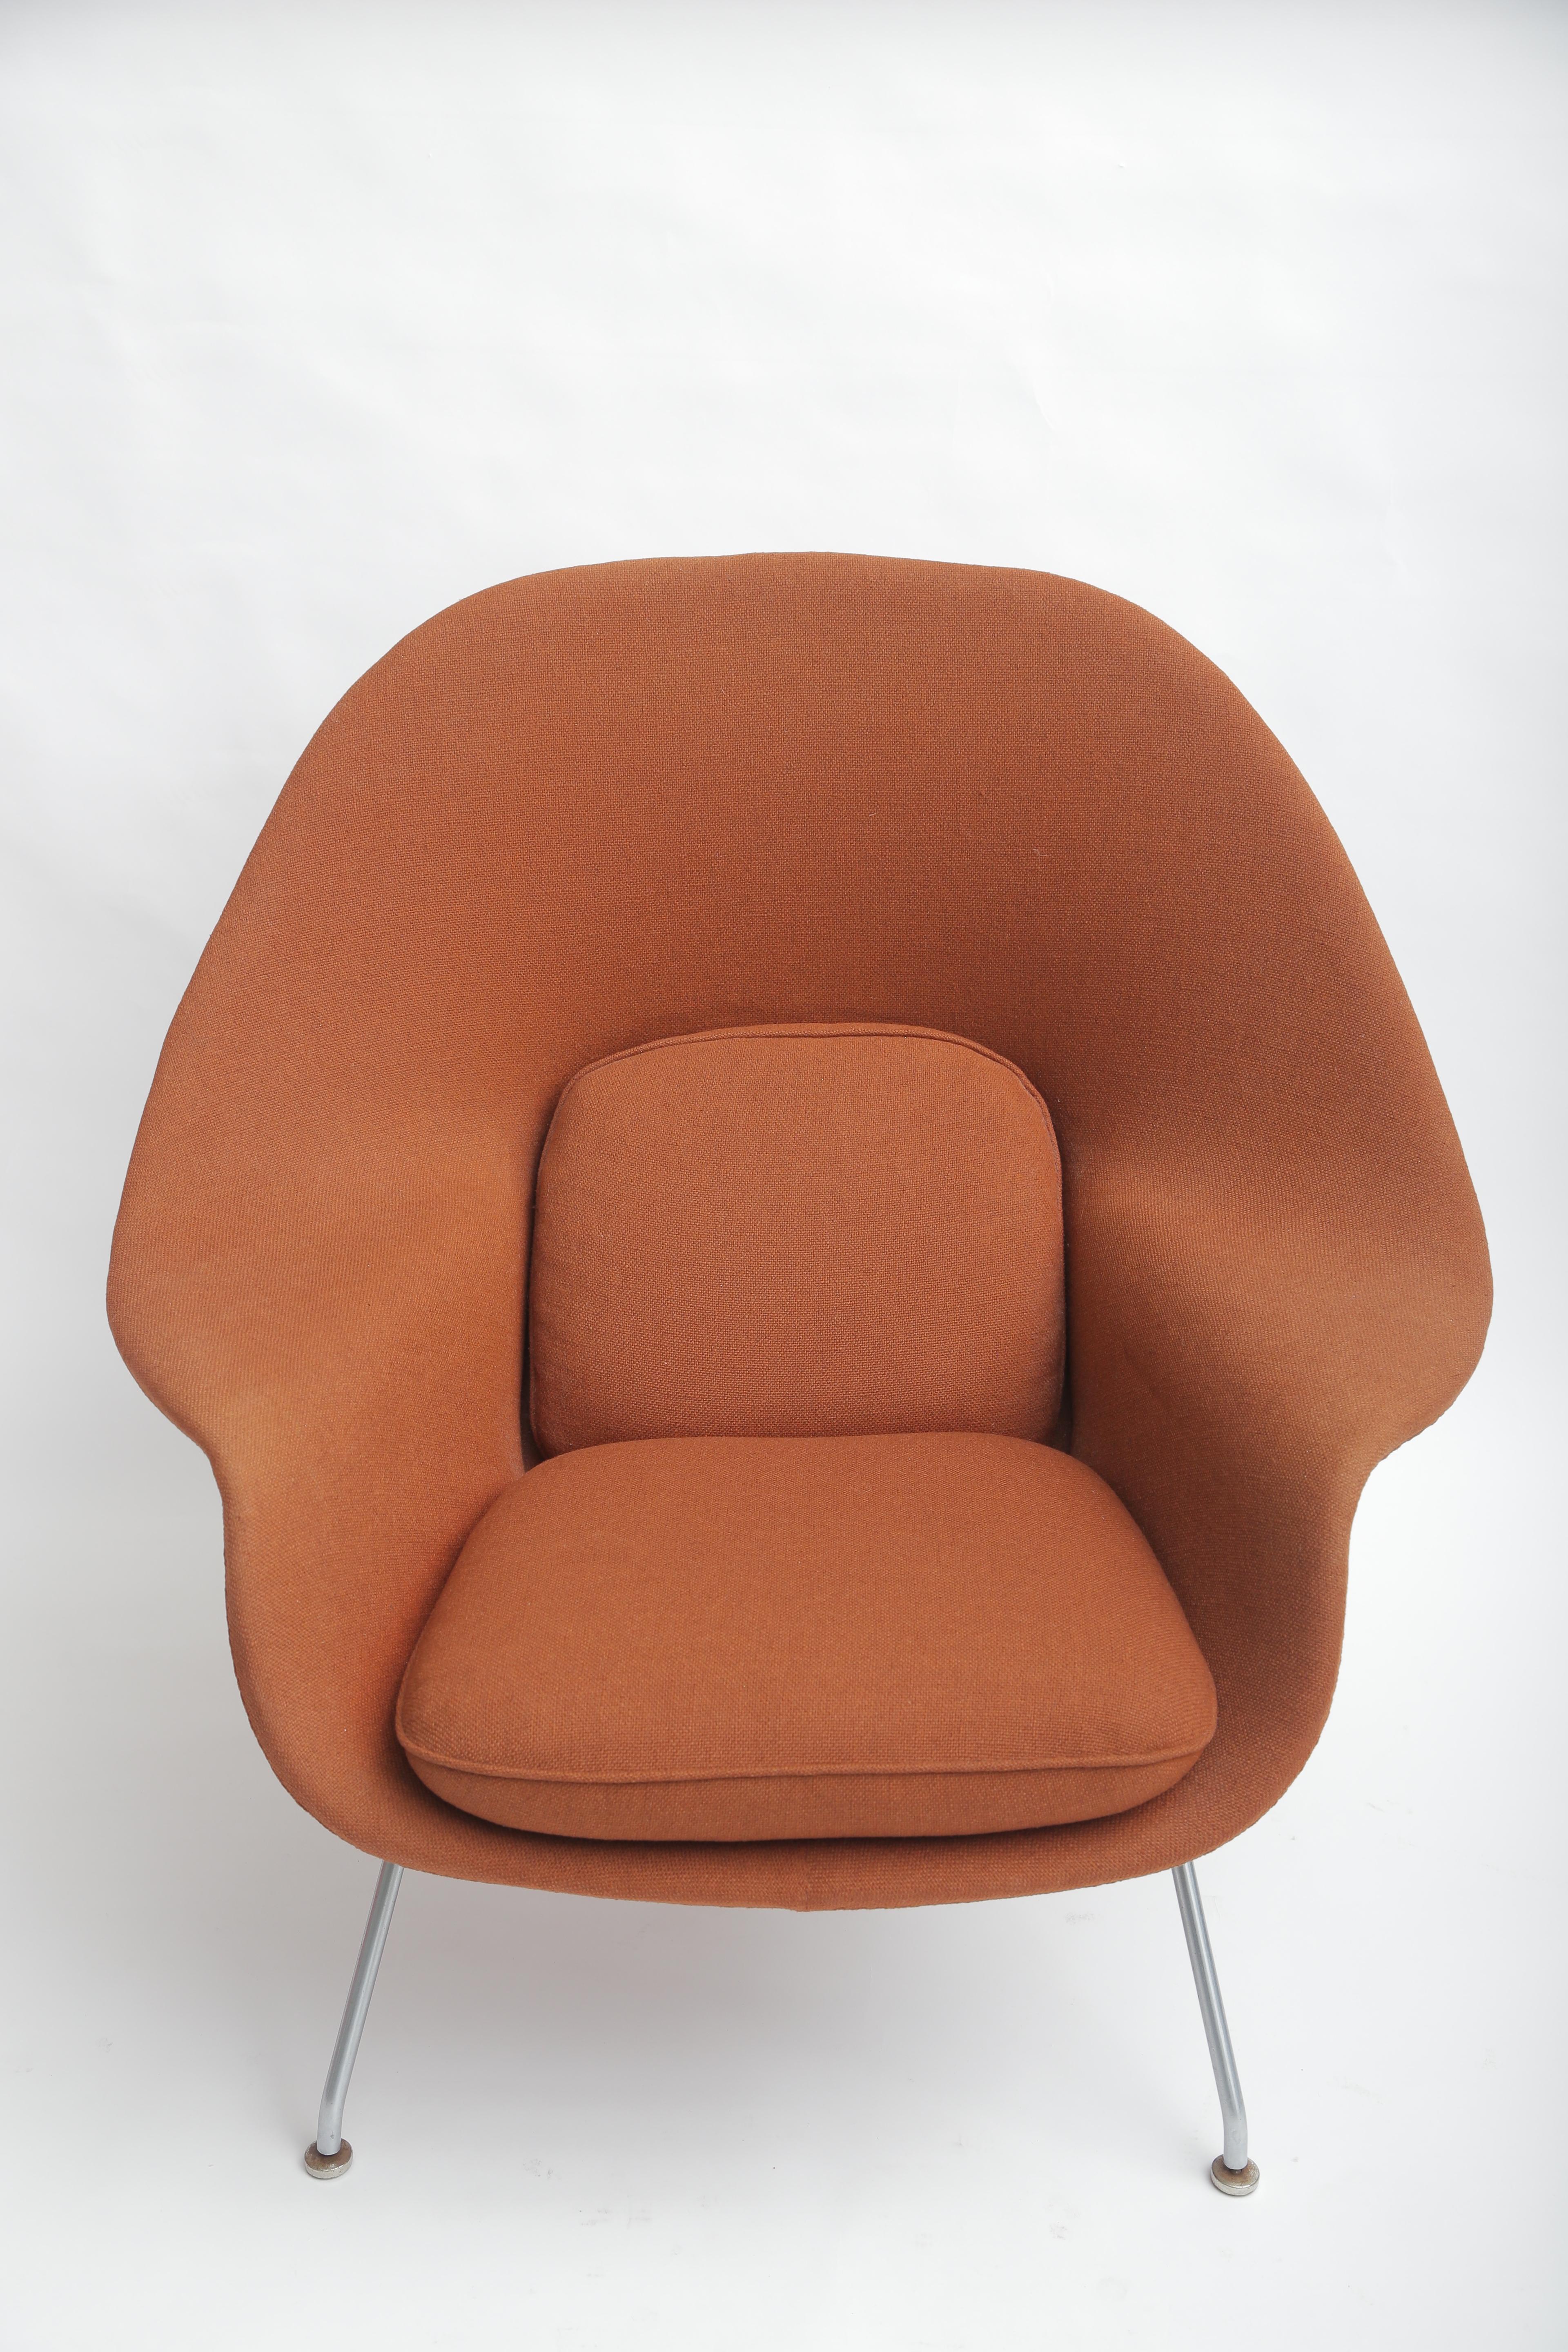 An iconic example manufactured in the 1960s.
Reupholstered by Knoll in the early 1970s.